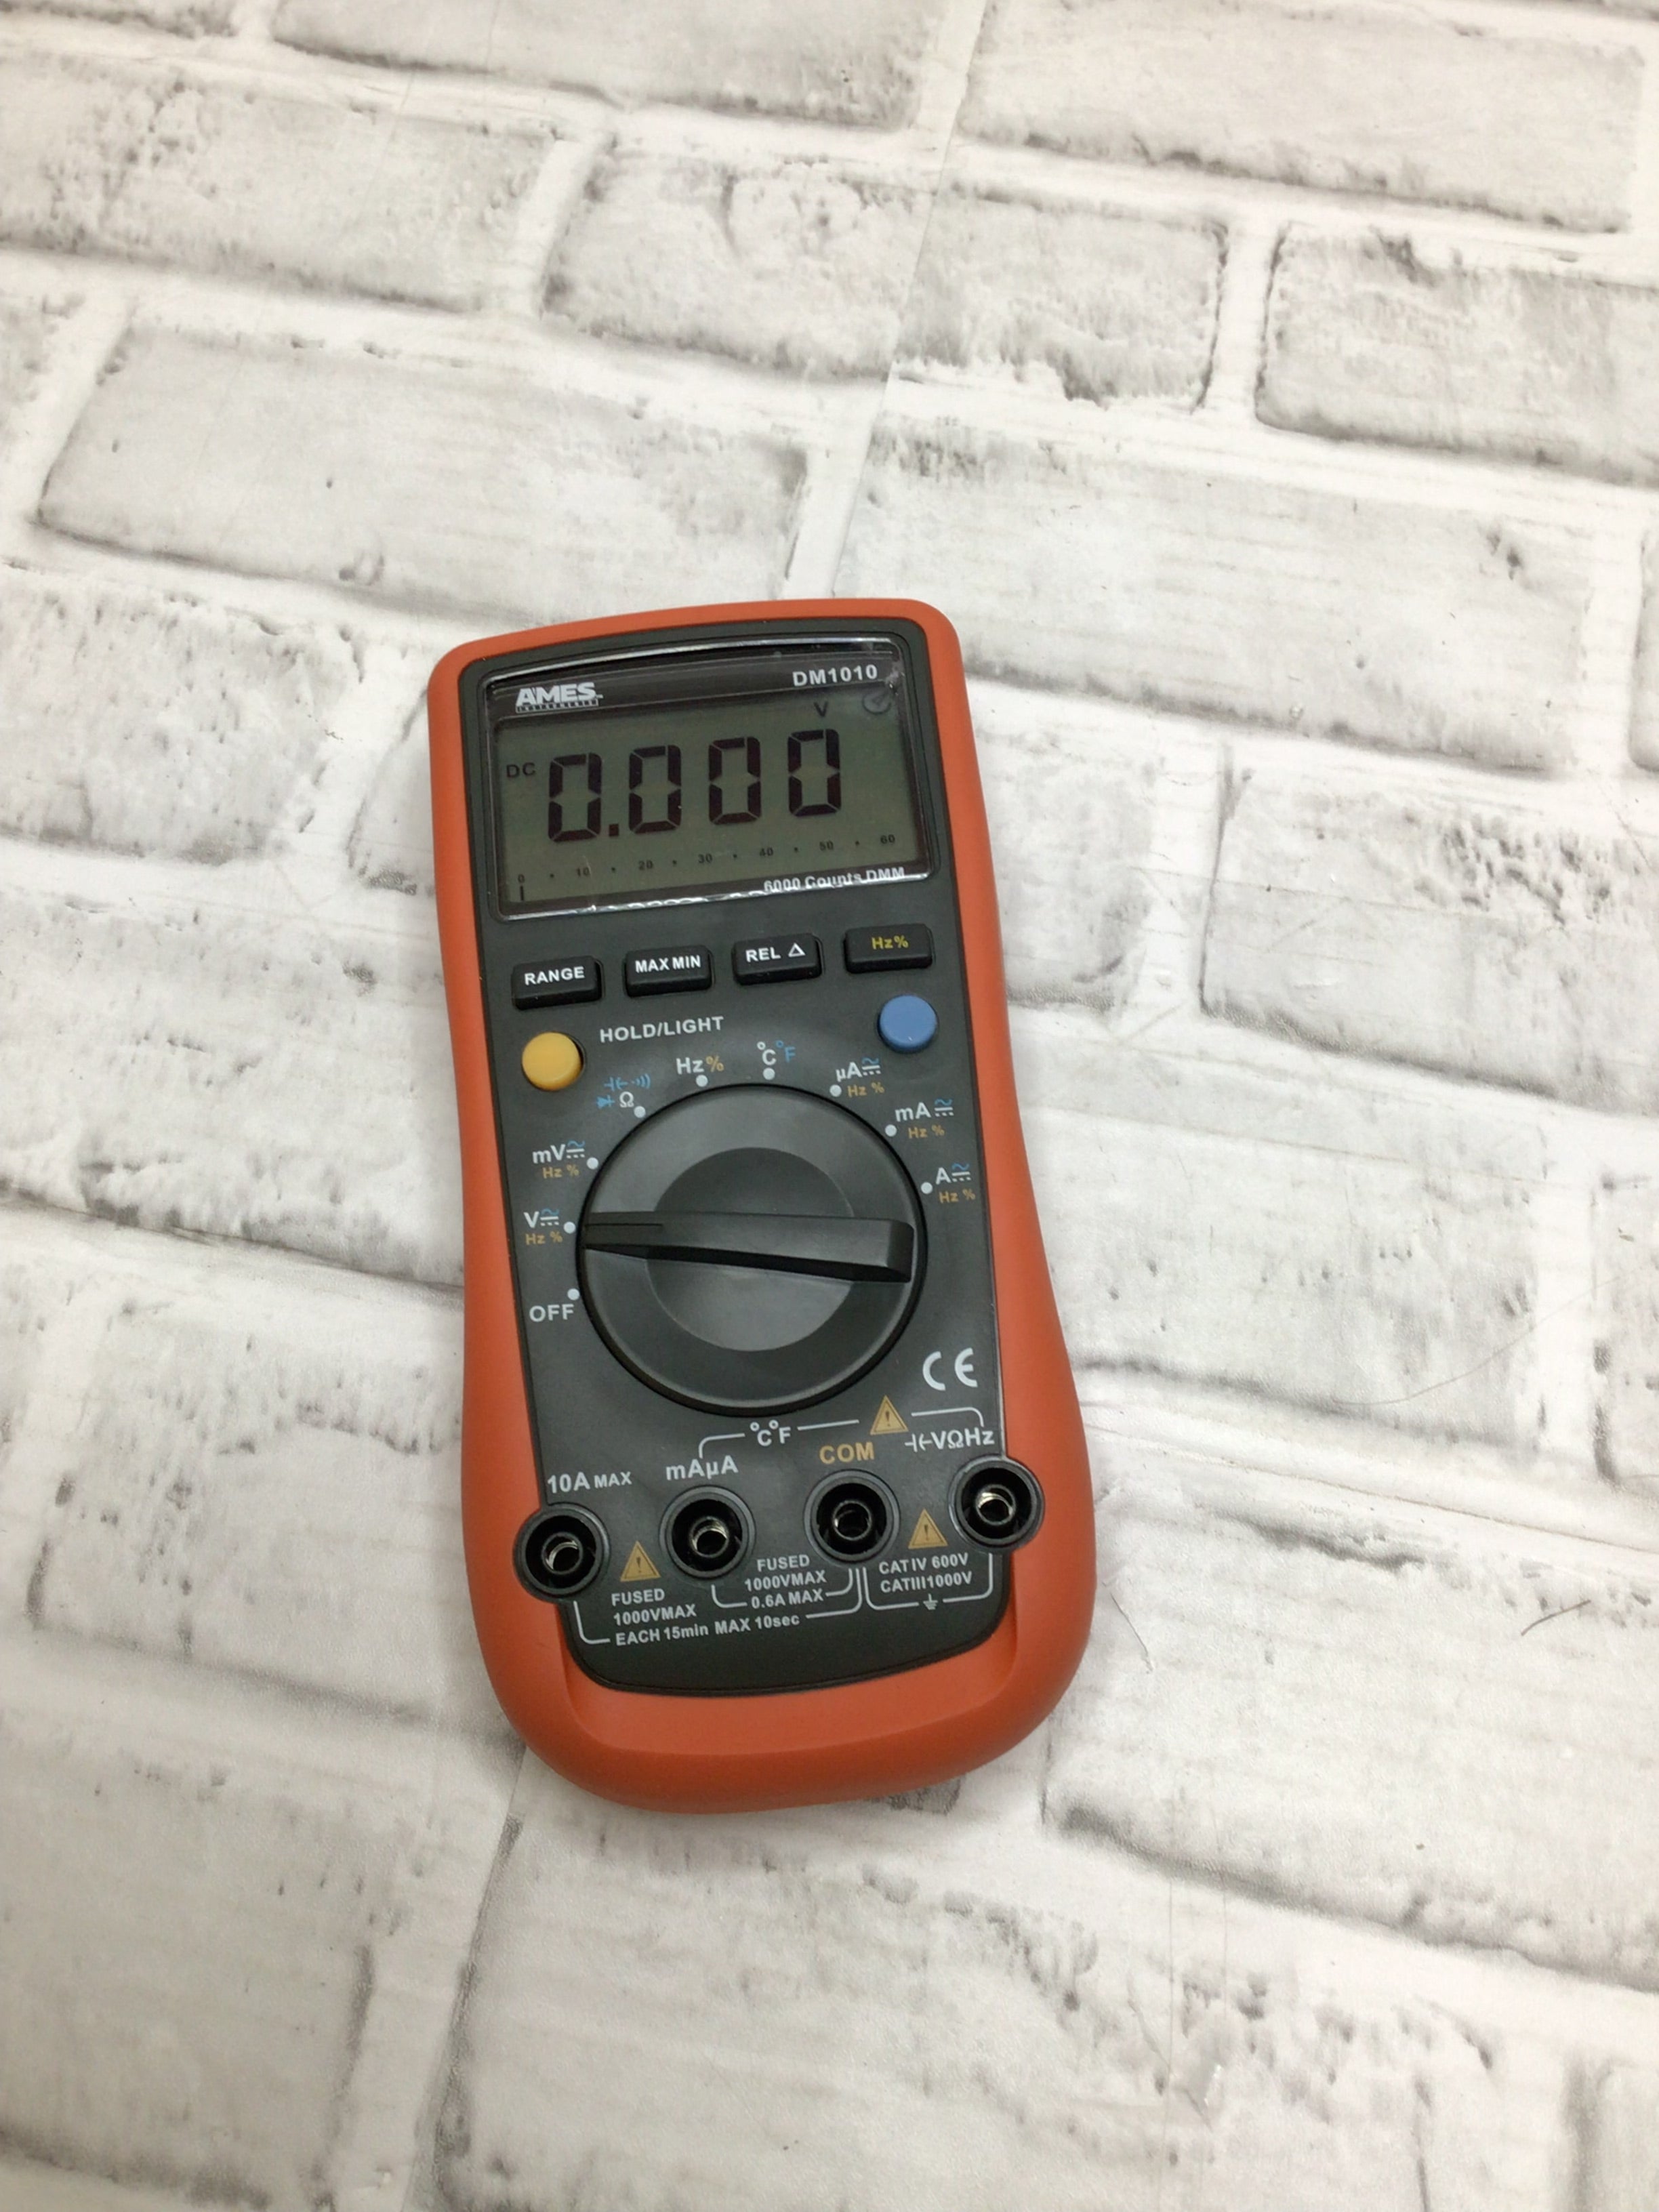 *FOR PARTS / NOT WORKING* Ames Dm1010 Commercial & Residential Multimeter Used (8094749688046)